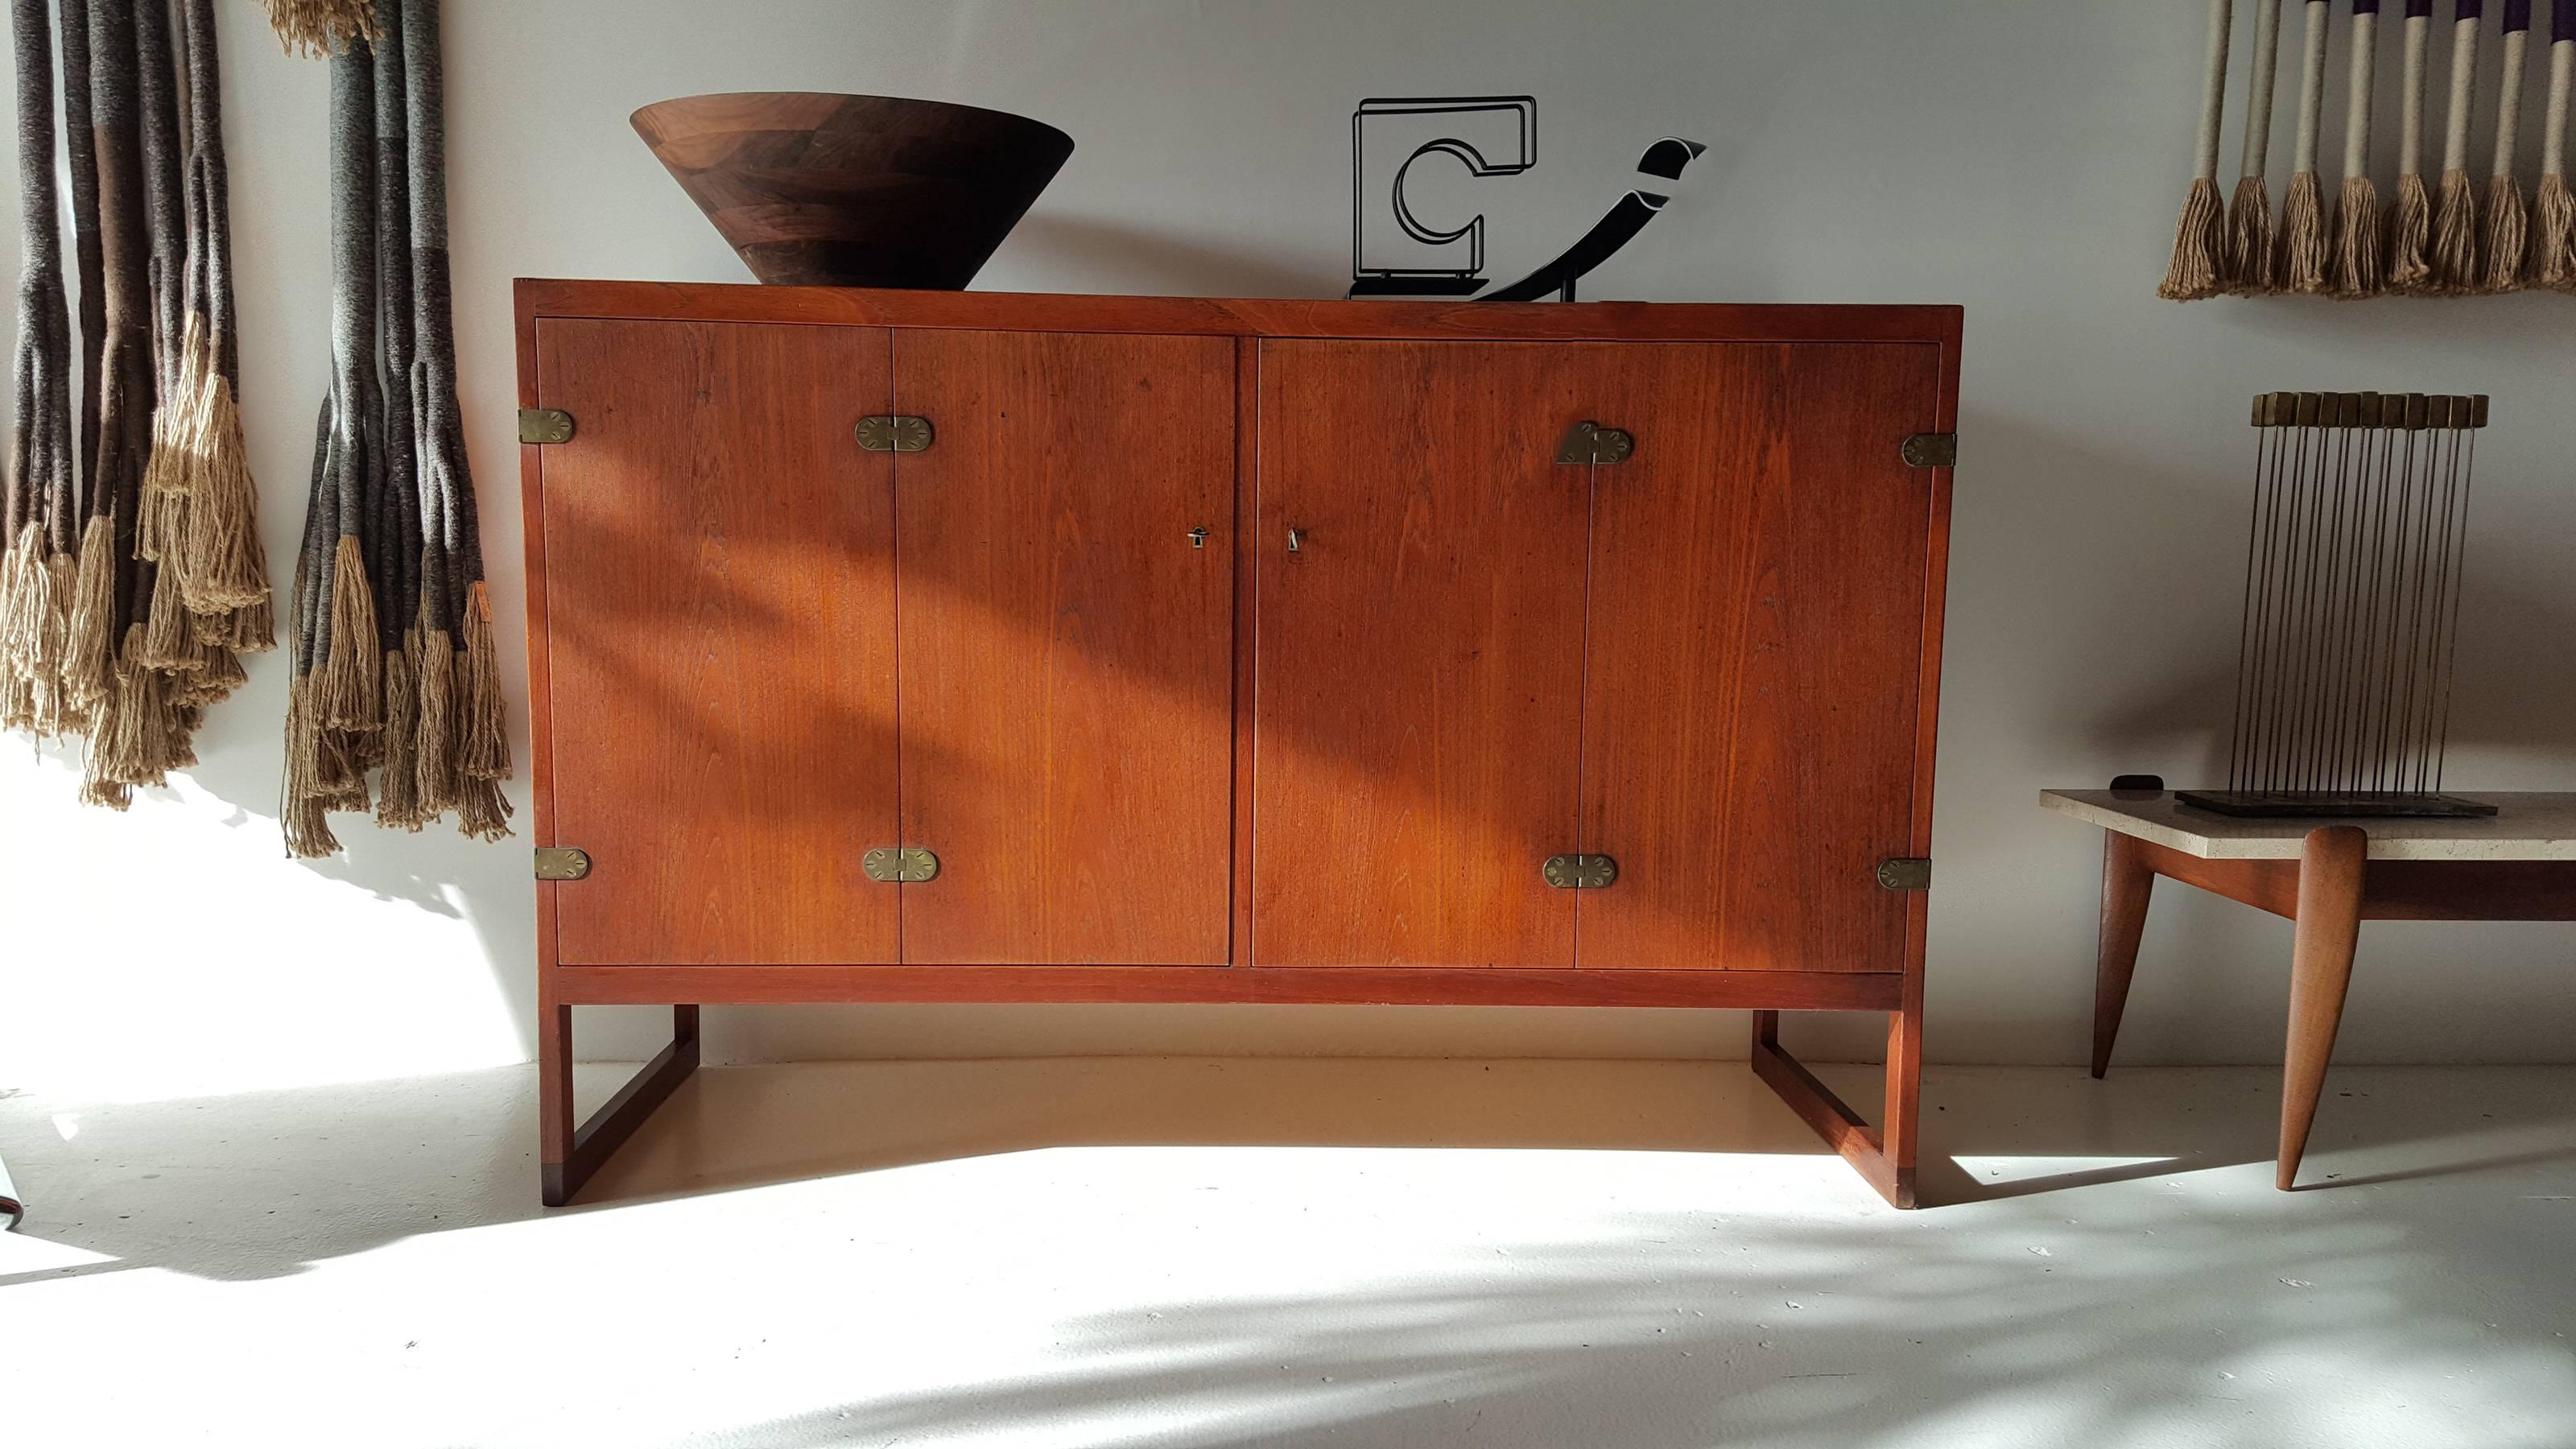 Elegantly understated Danish modern teak cabinet designed by Borge Mogensen for P. Lauritsen and Son. Two bi-fold doors open to reveal four oak finger-jointed drawers and two shelves. The exposed brass hinges on this piece add just the right touch